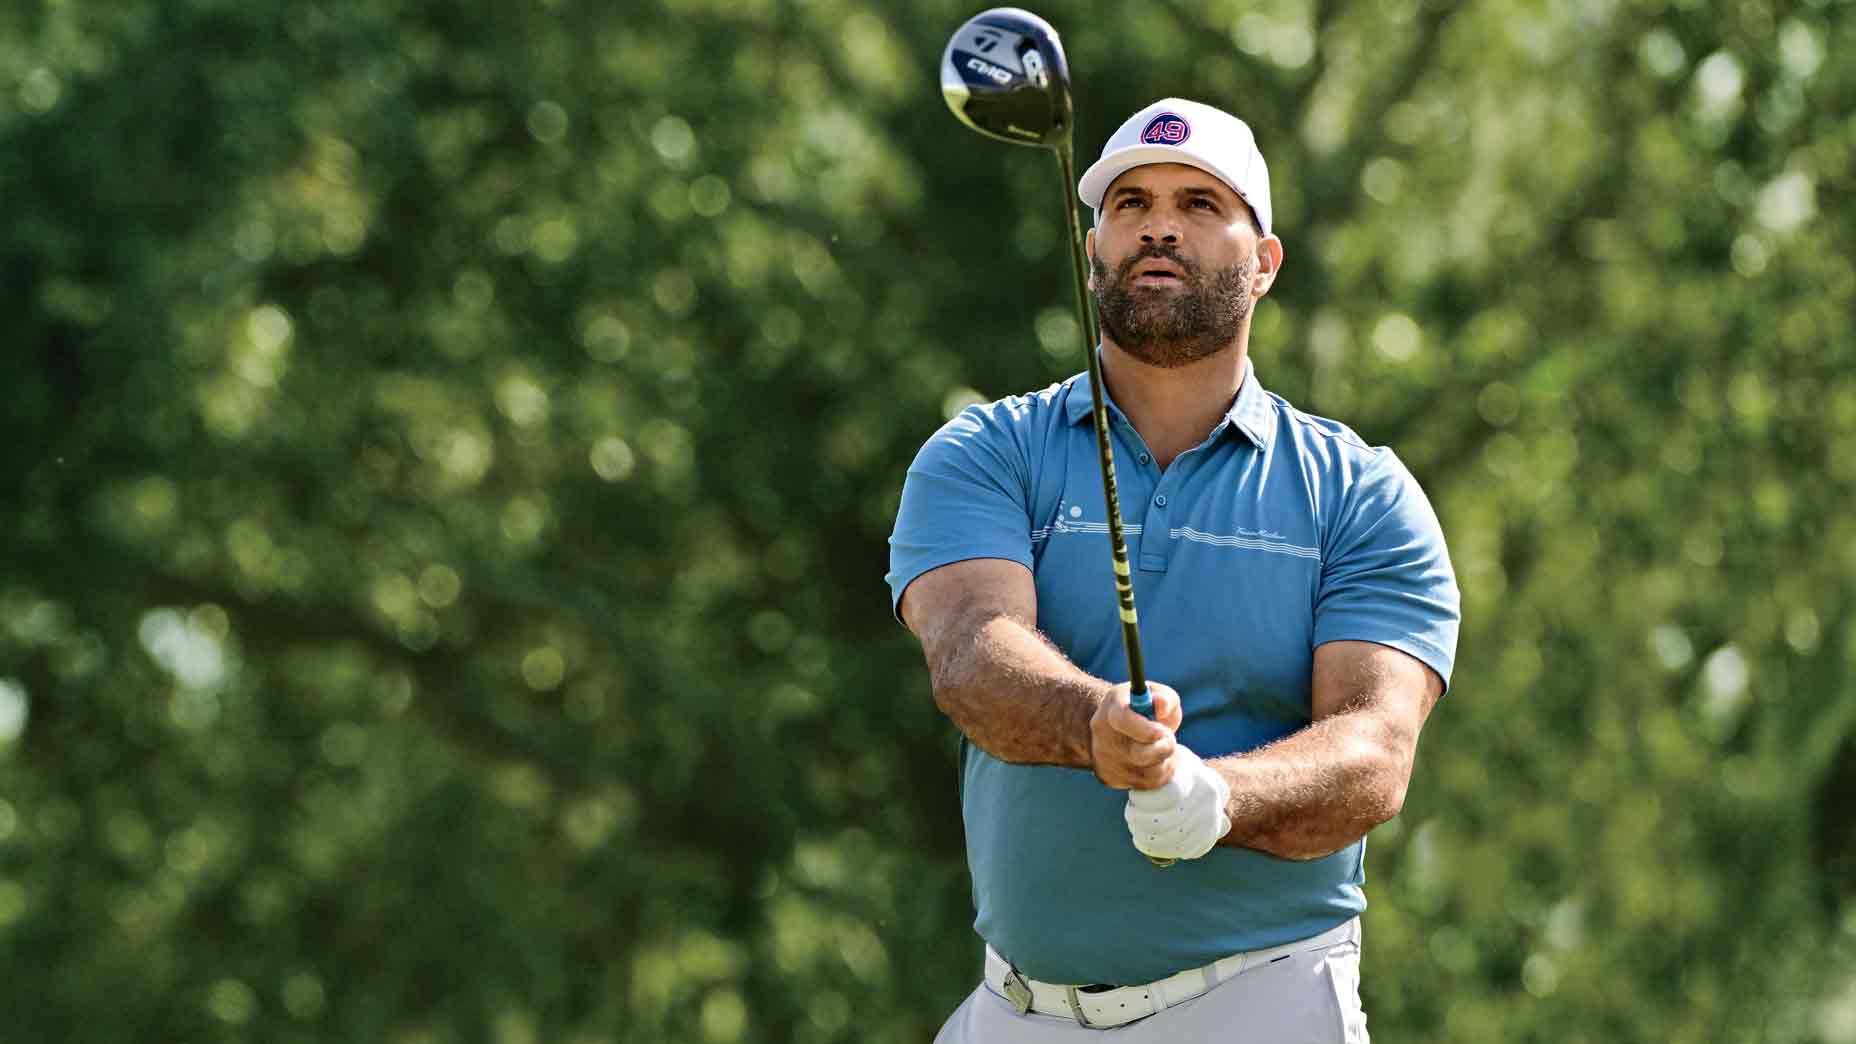 Retired professional baseball player Albert Pujols plays his shot from the ninth tee during the first round of the Hilton Grand Vacations Tournament of Champions at Lake Nona Golf & Country Club on January 18, 2024 in Orlando, Florida